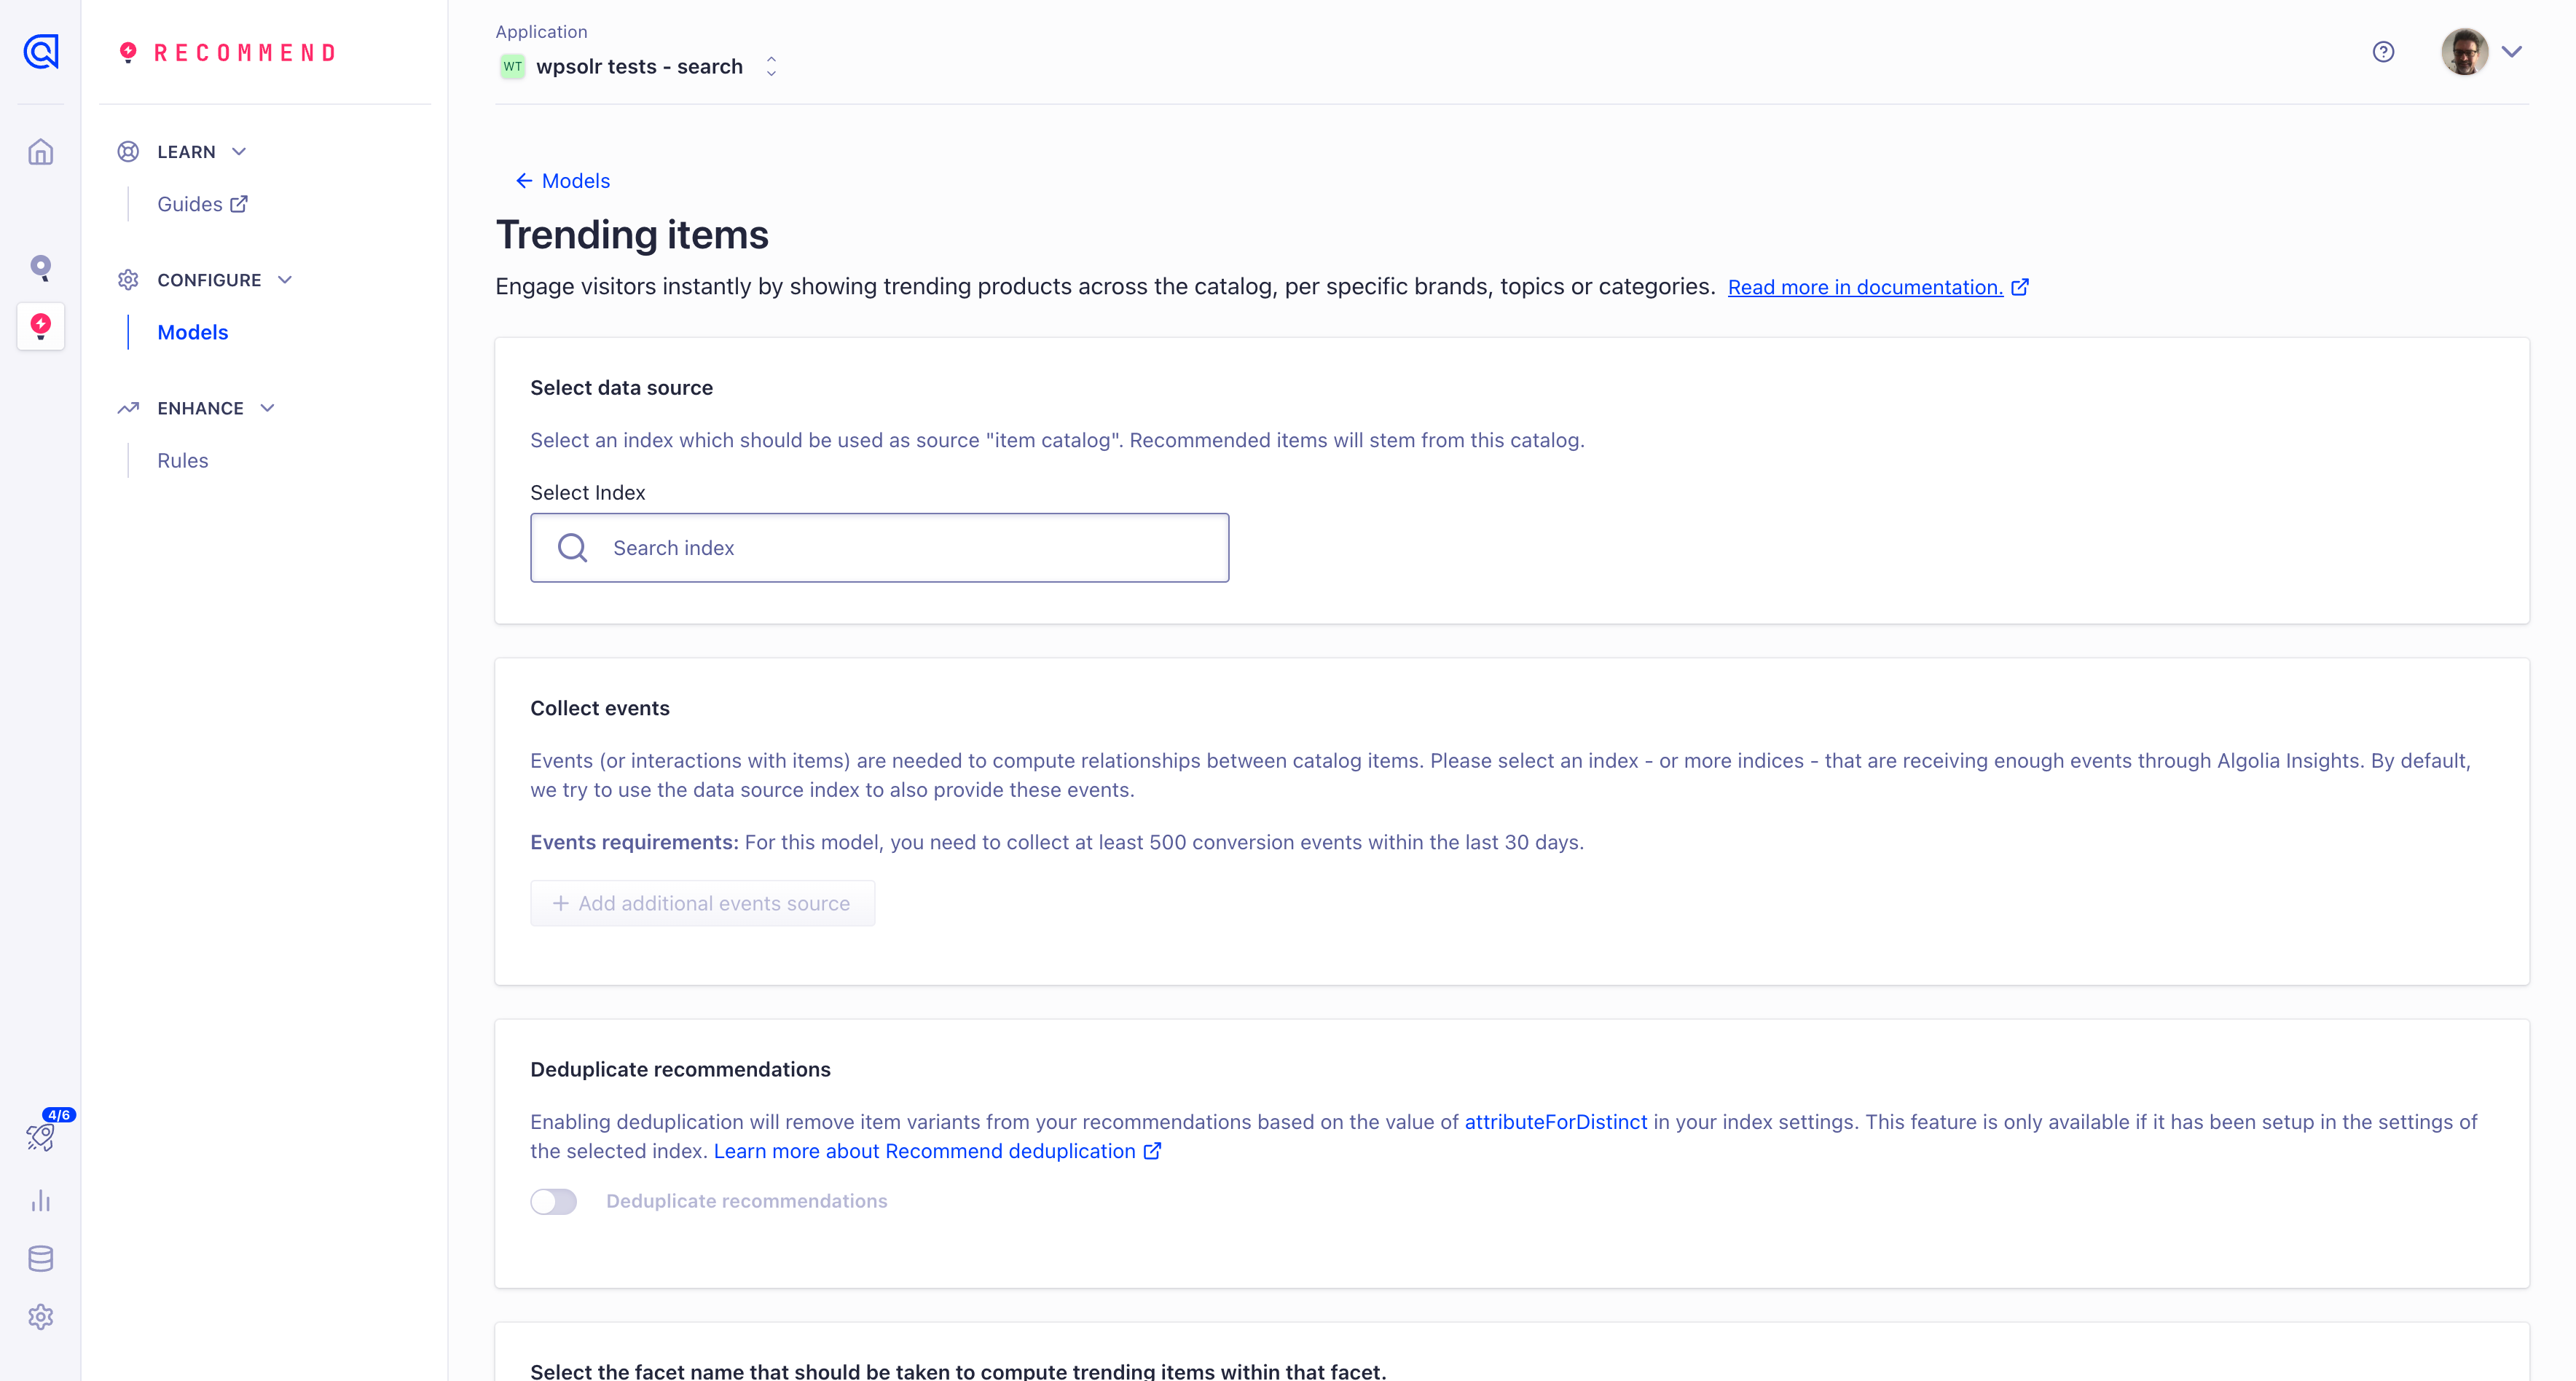 Image algolia-model-trending-items.png of Algolia recommendations guide